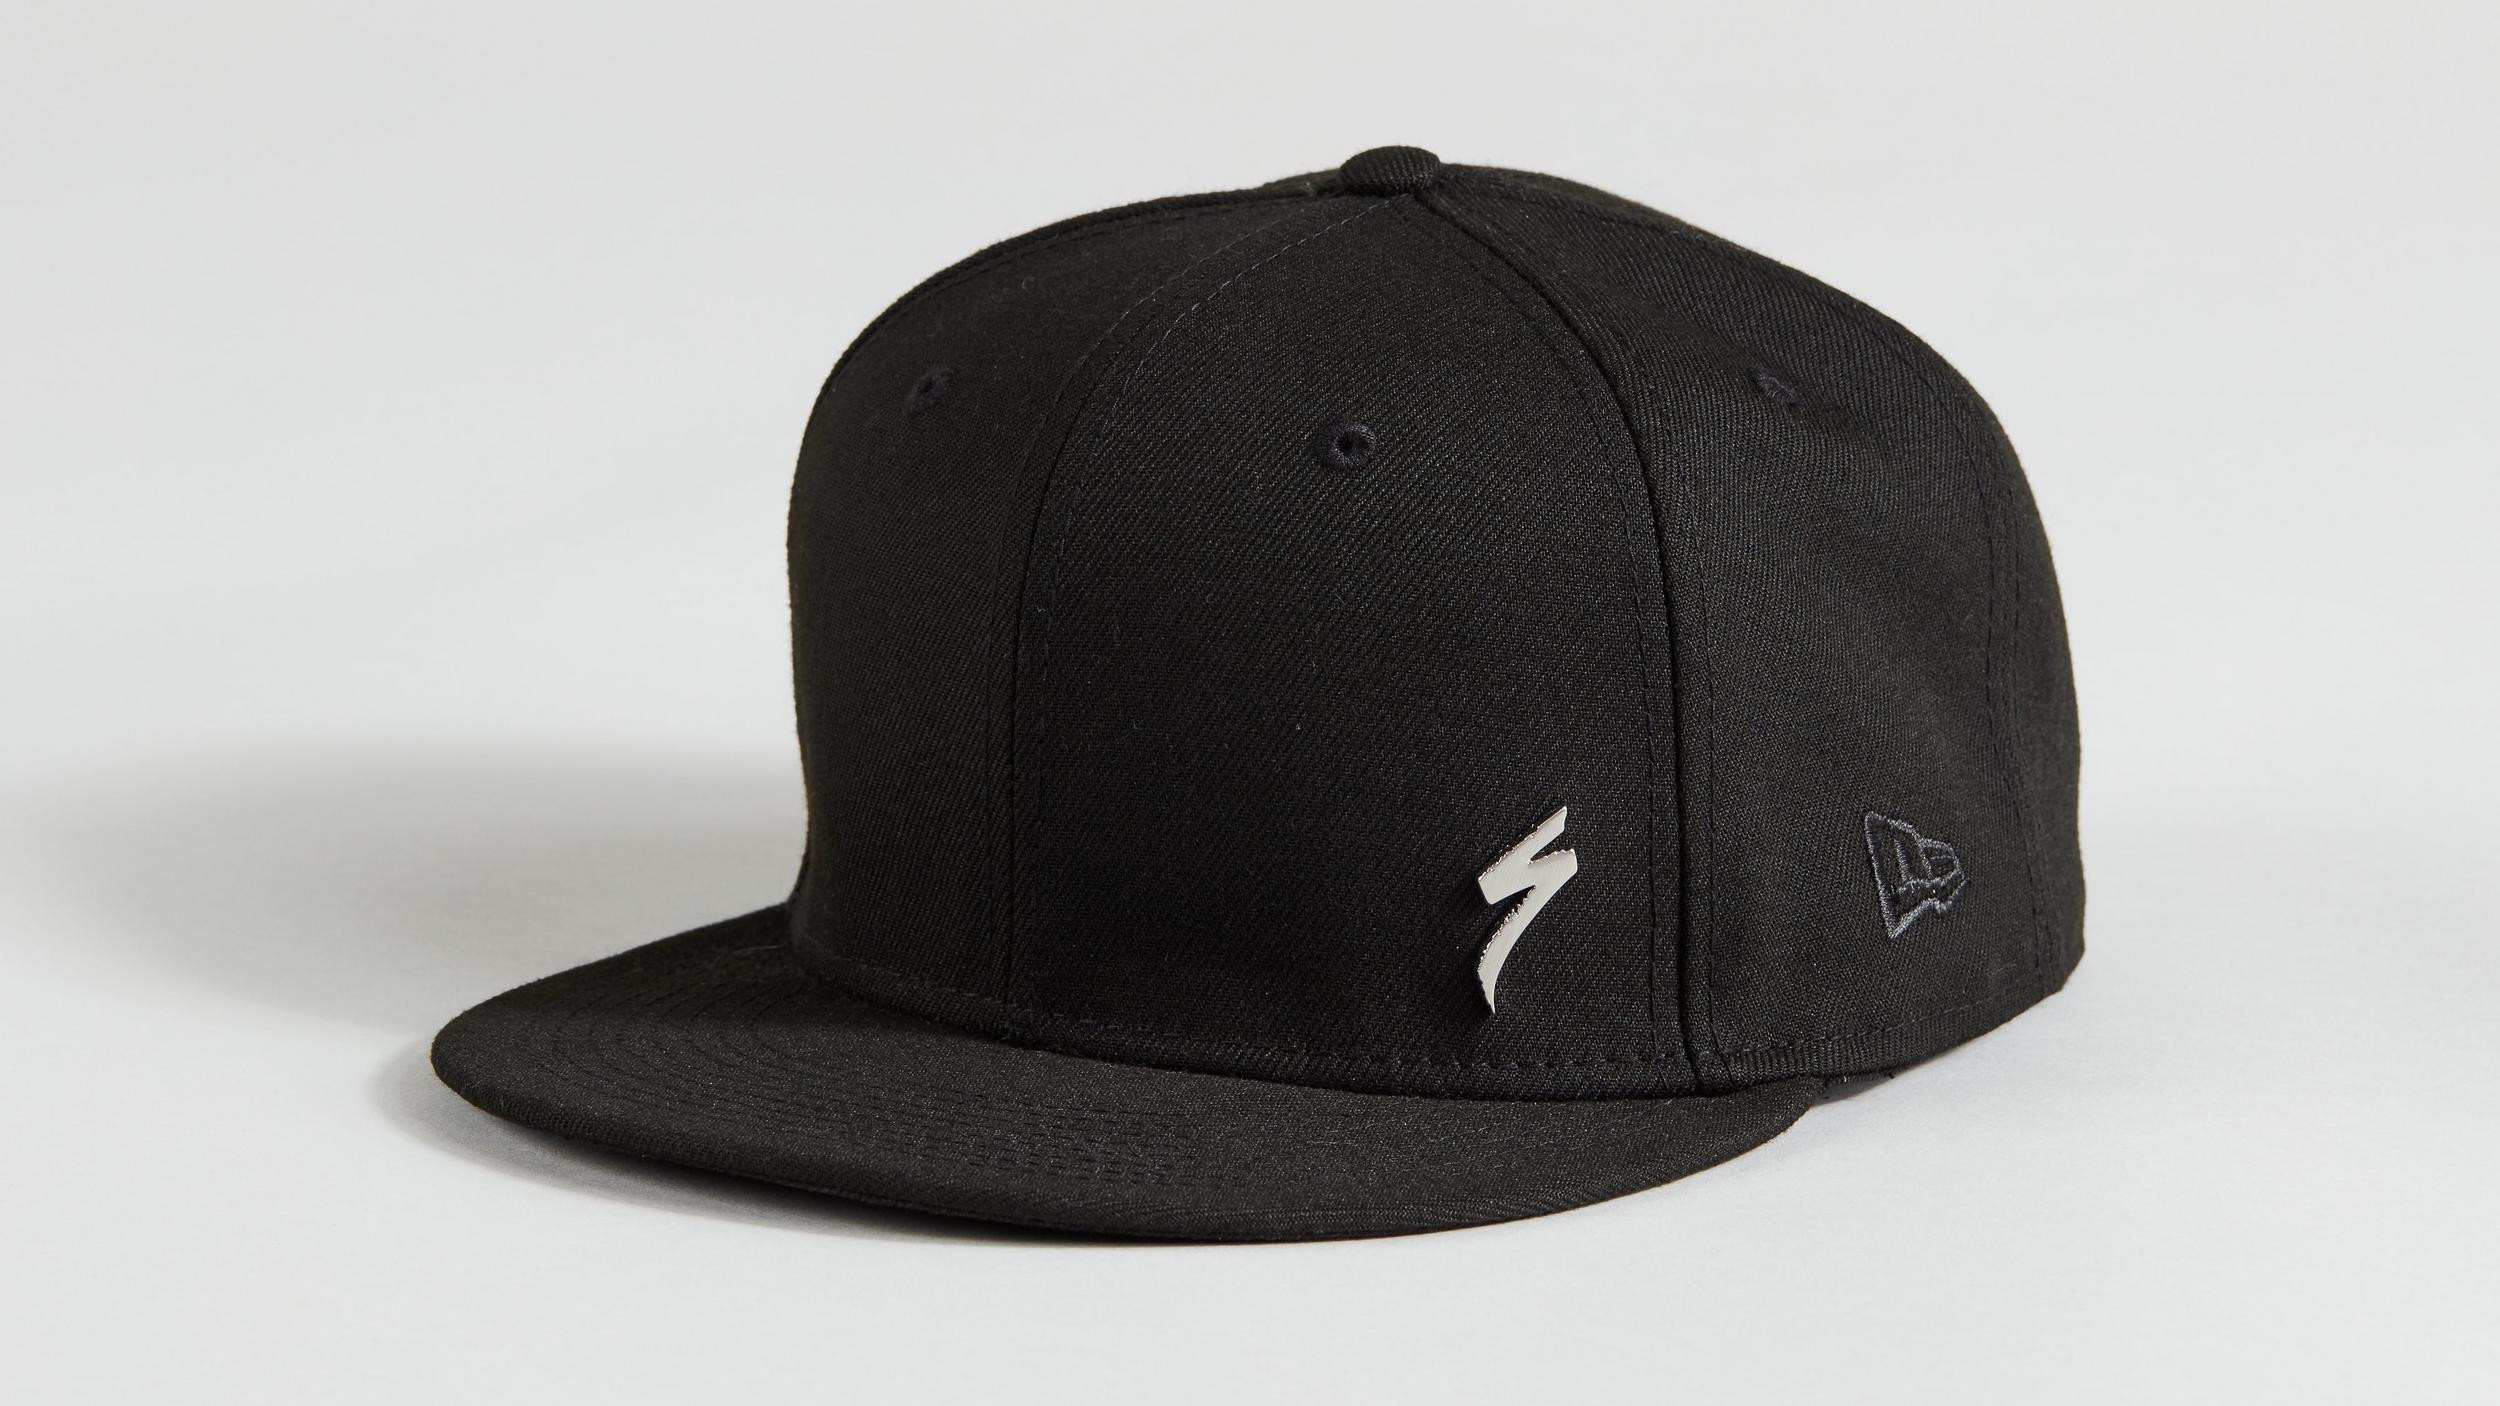 New Metal 9Fifty Hat | Specialized.com